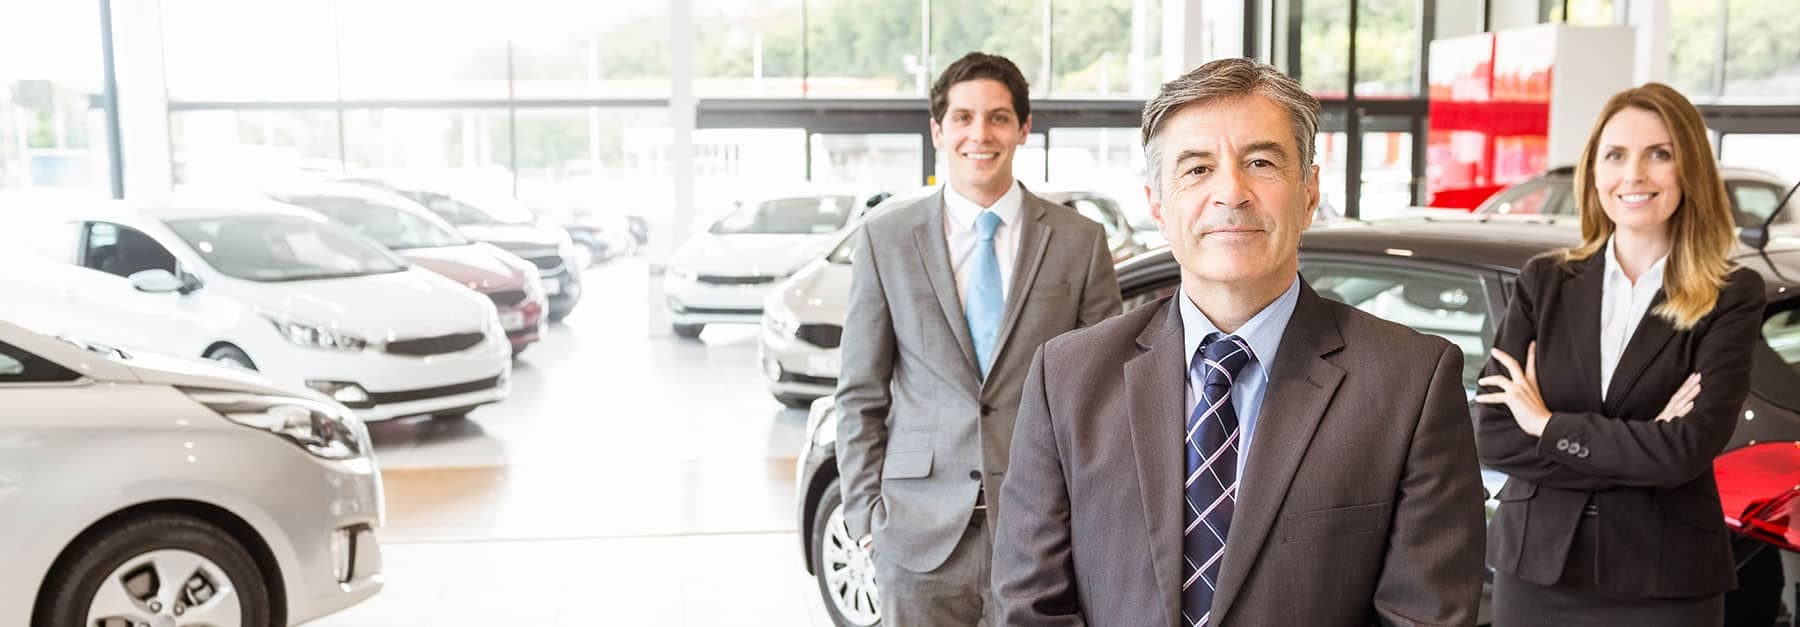 Dealership ready to assist customers